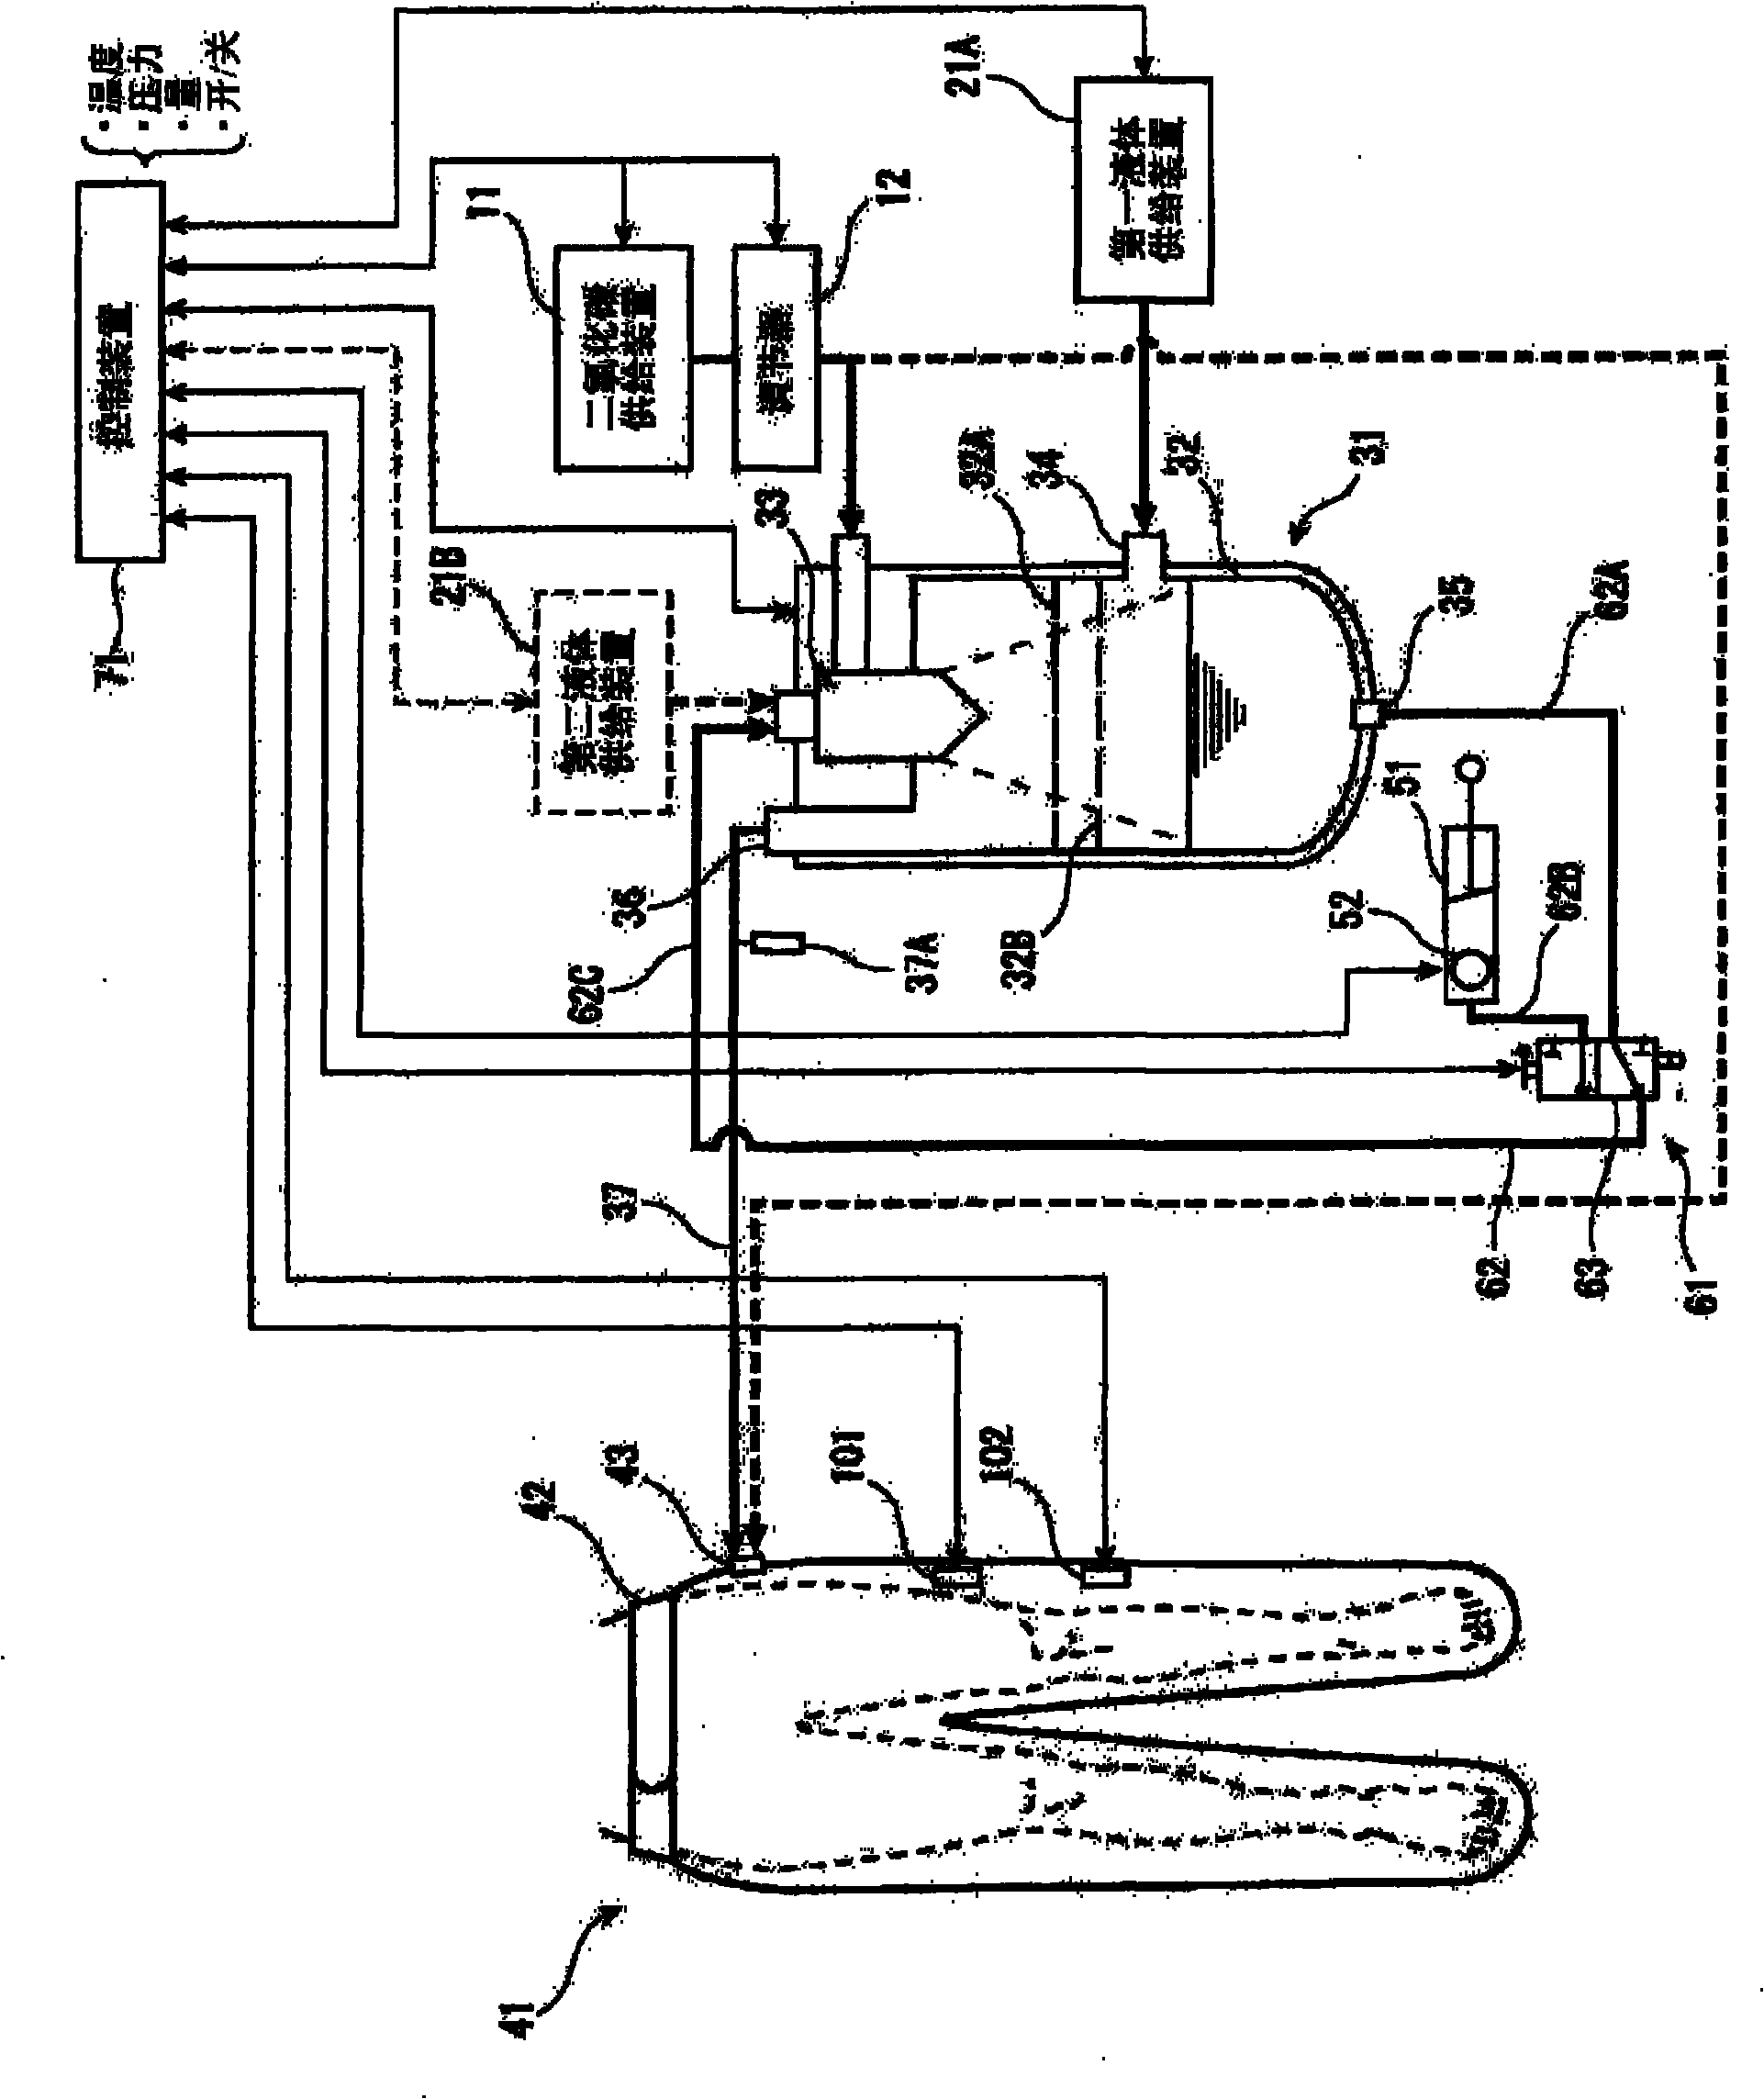 Pressurized carbon dioxide-containing mist bathing system